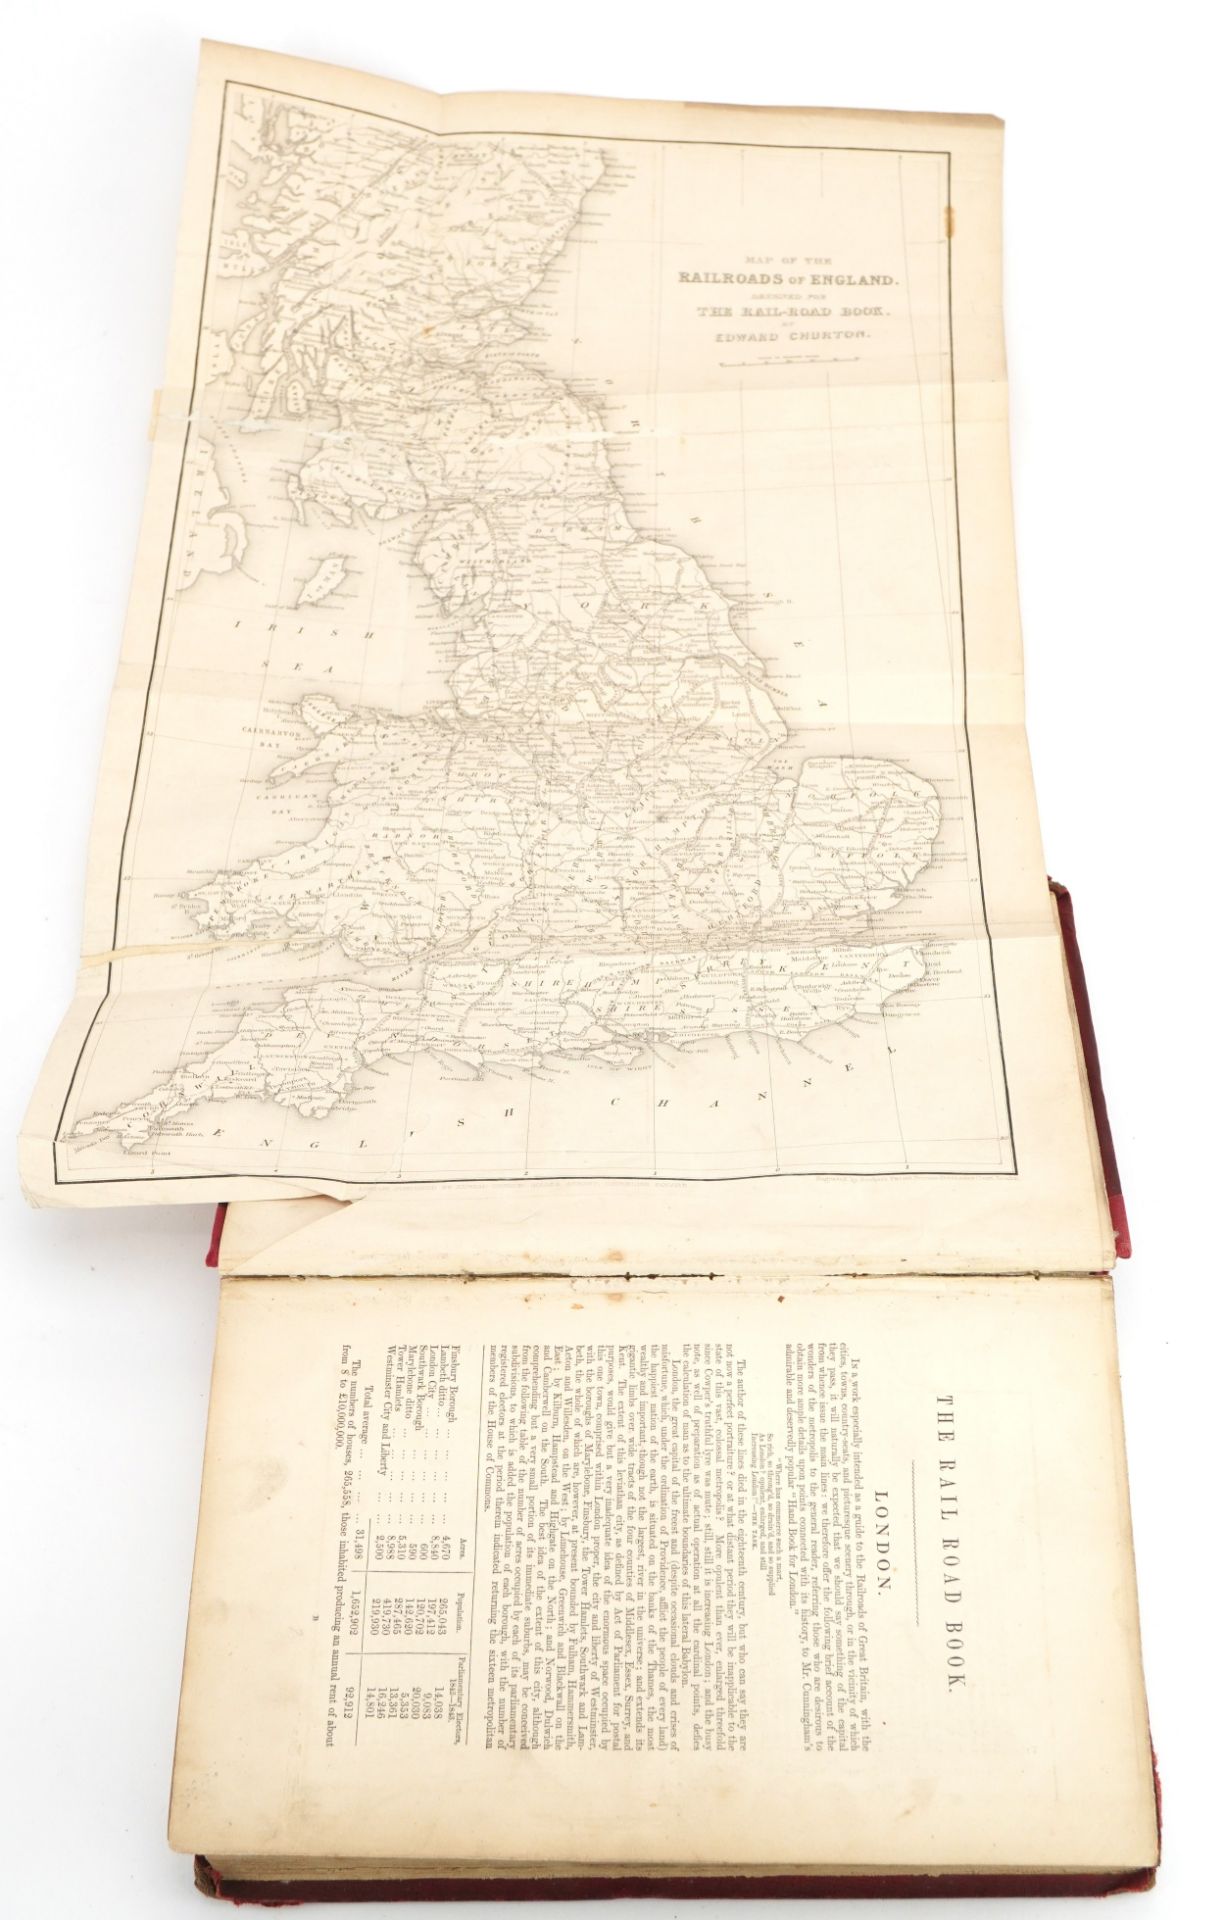 The Rail Road book of England, hardback book by E Churton with fold out map, published London Edward - Bild 2 aus 4